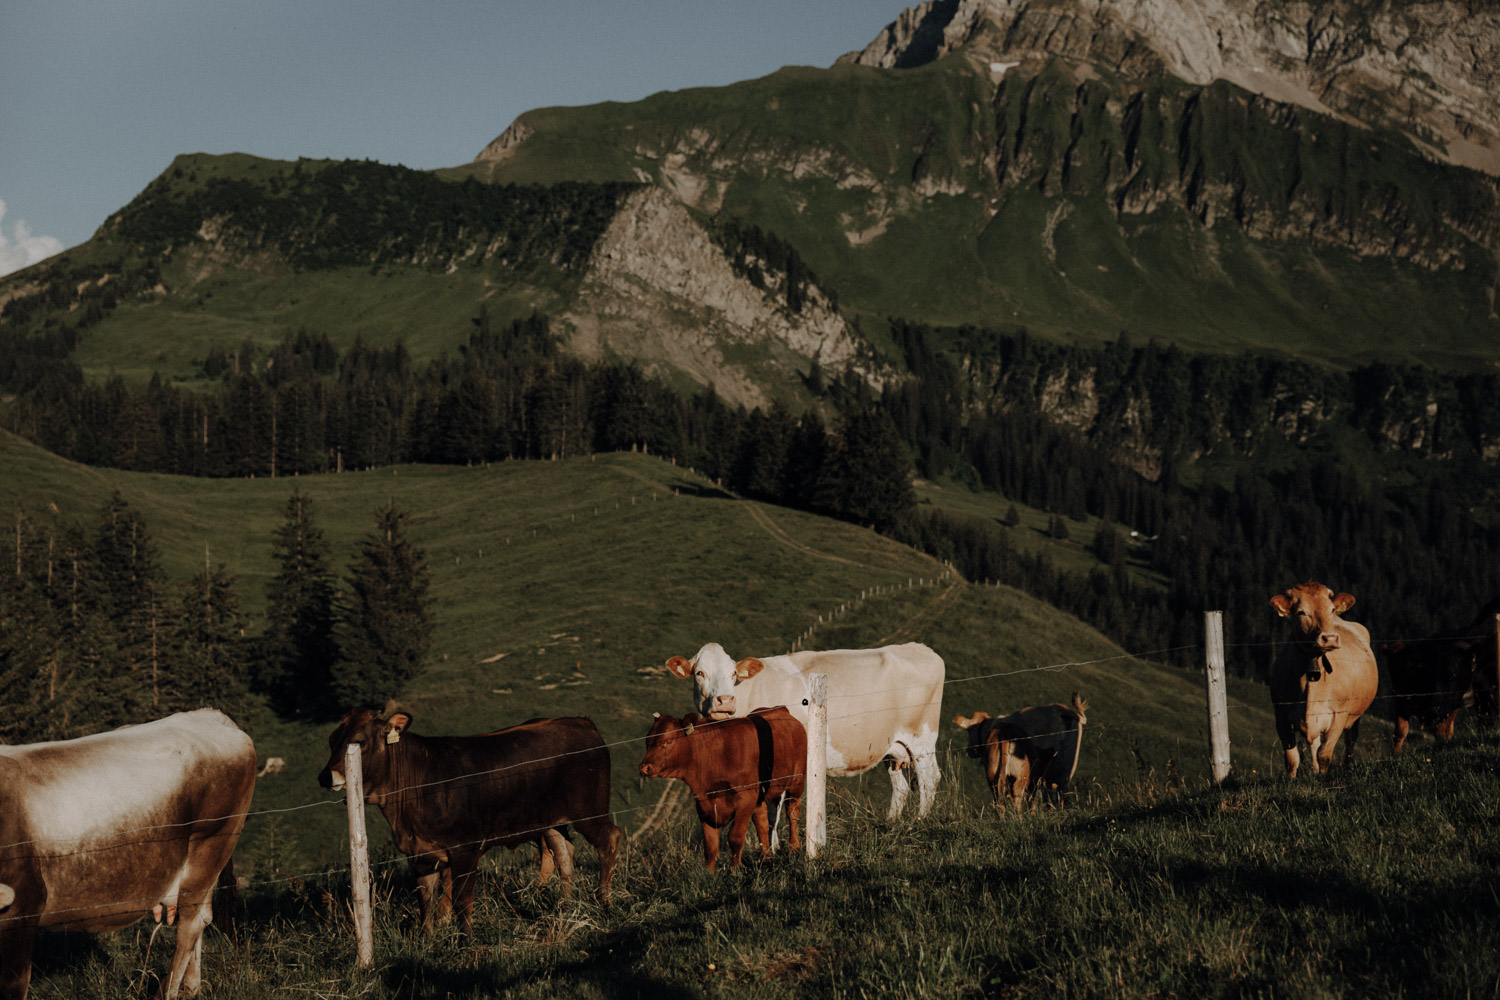 Cows in the Swiss alps shot during an elopement in Switzerland by an elopement photographer